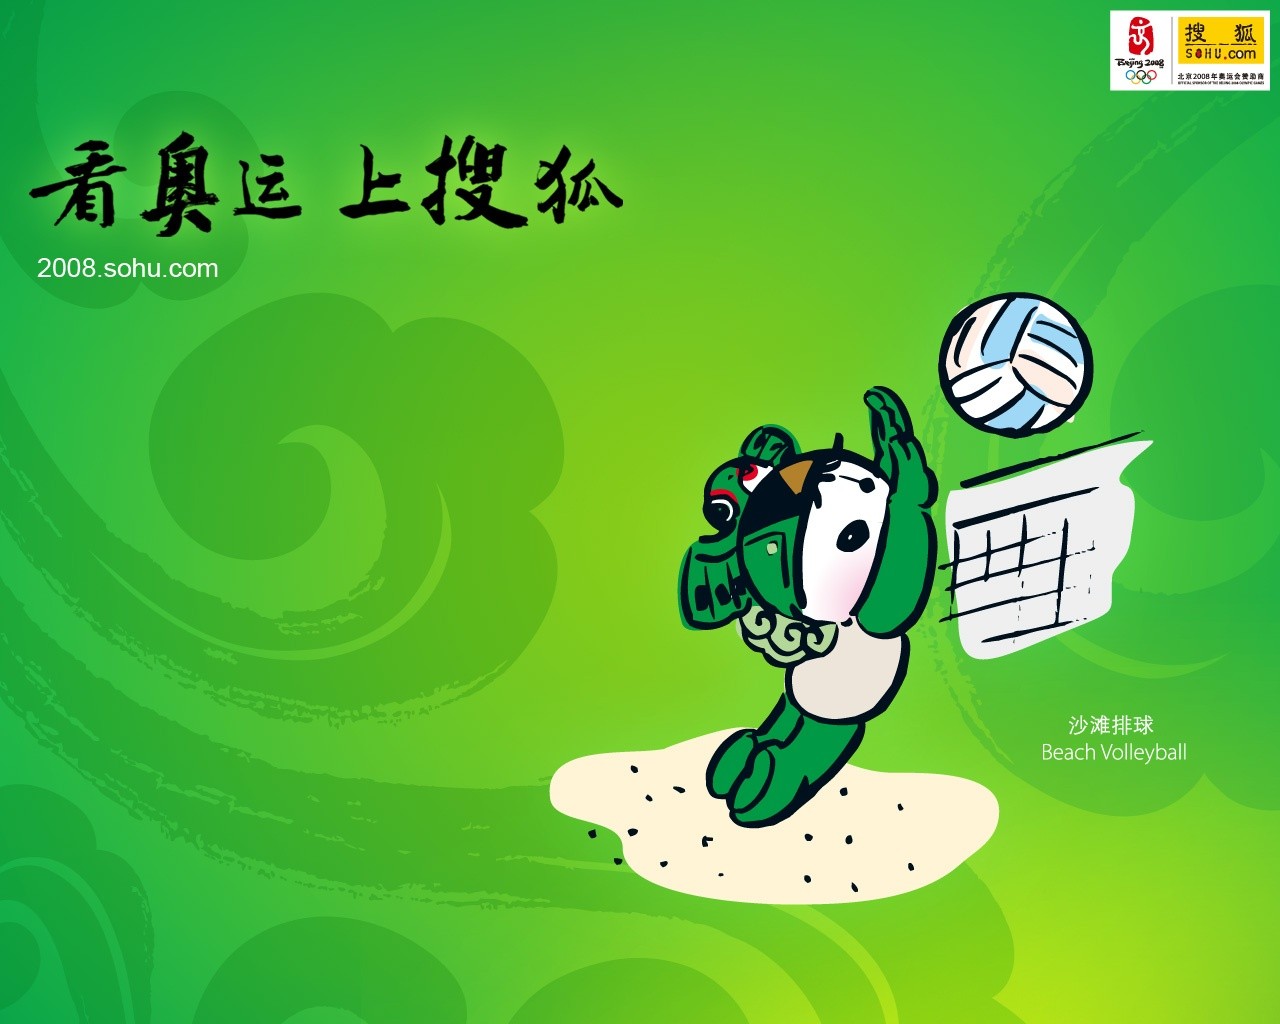 08 Olympic Games Fuwa Wallpapers #27 - 1280x1024